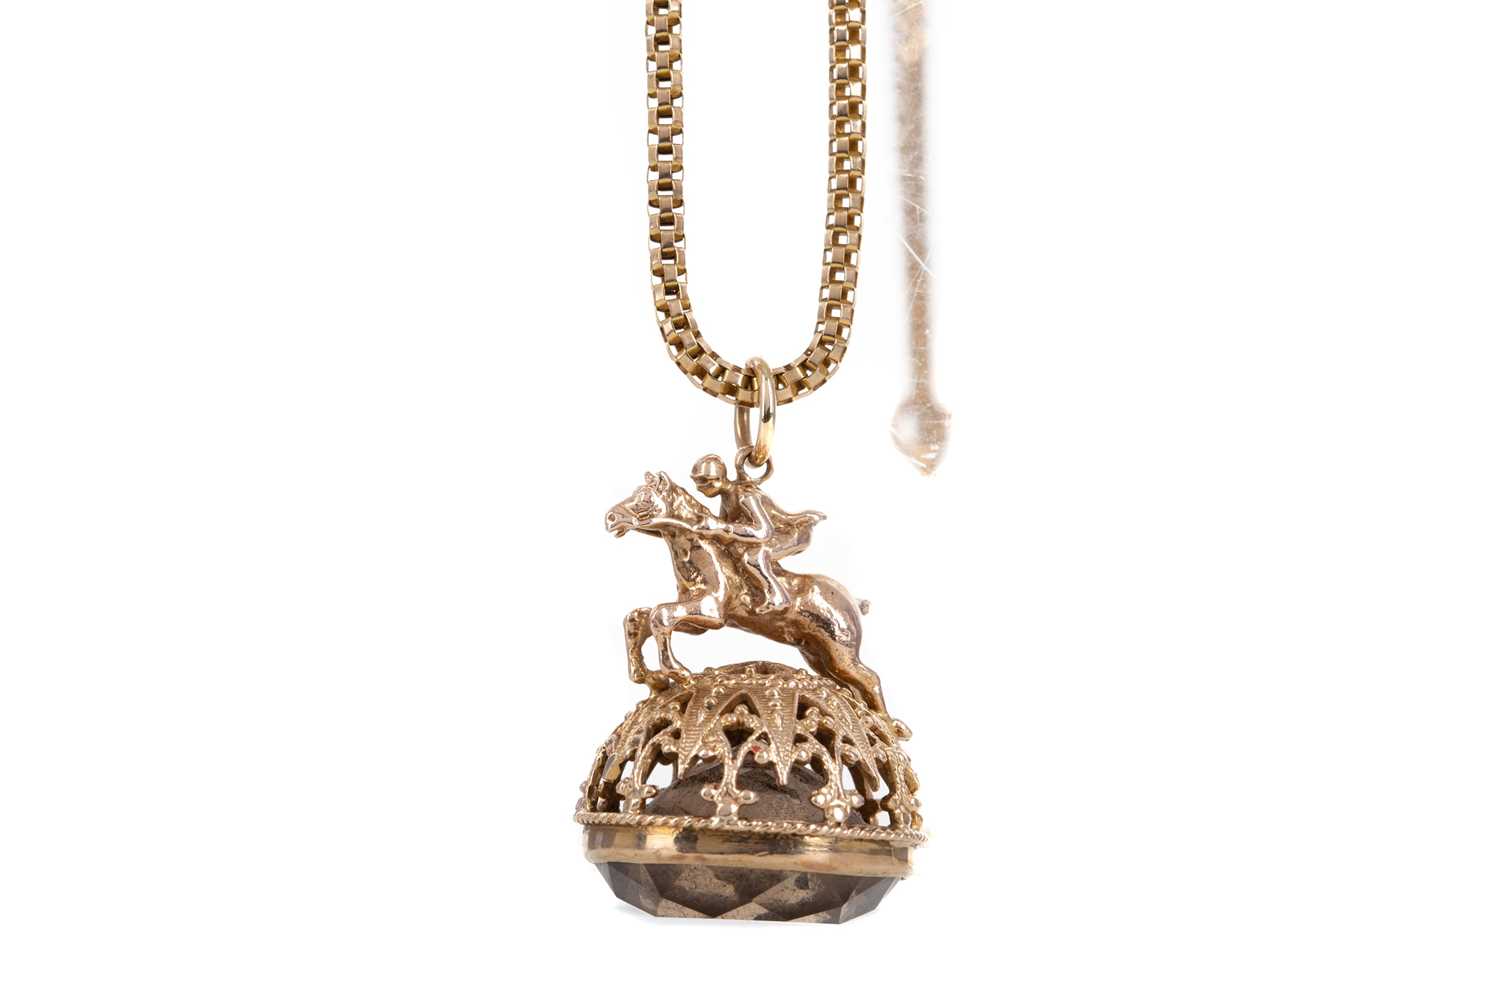 Lot 660 - A GOLD CHAIN WITH SMOKY QUARTZ FOB